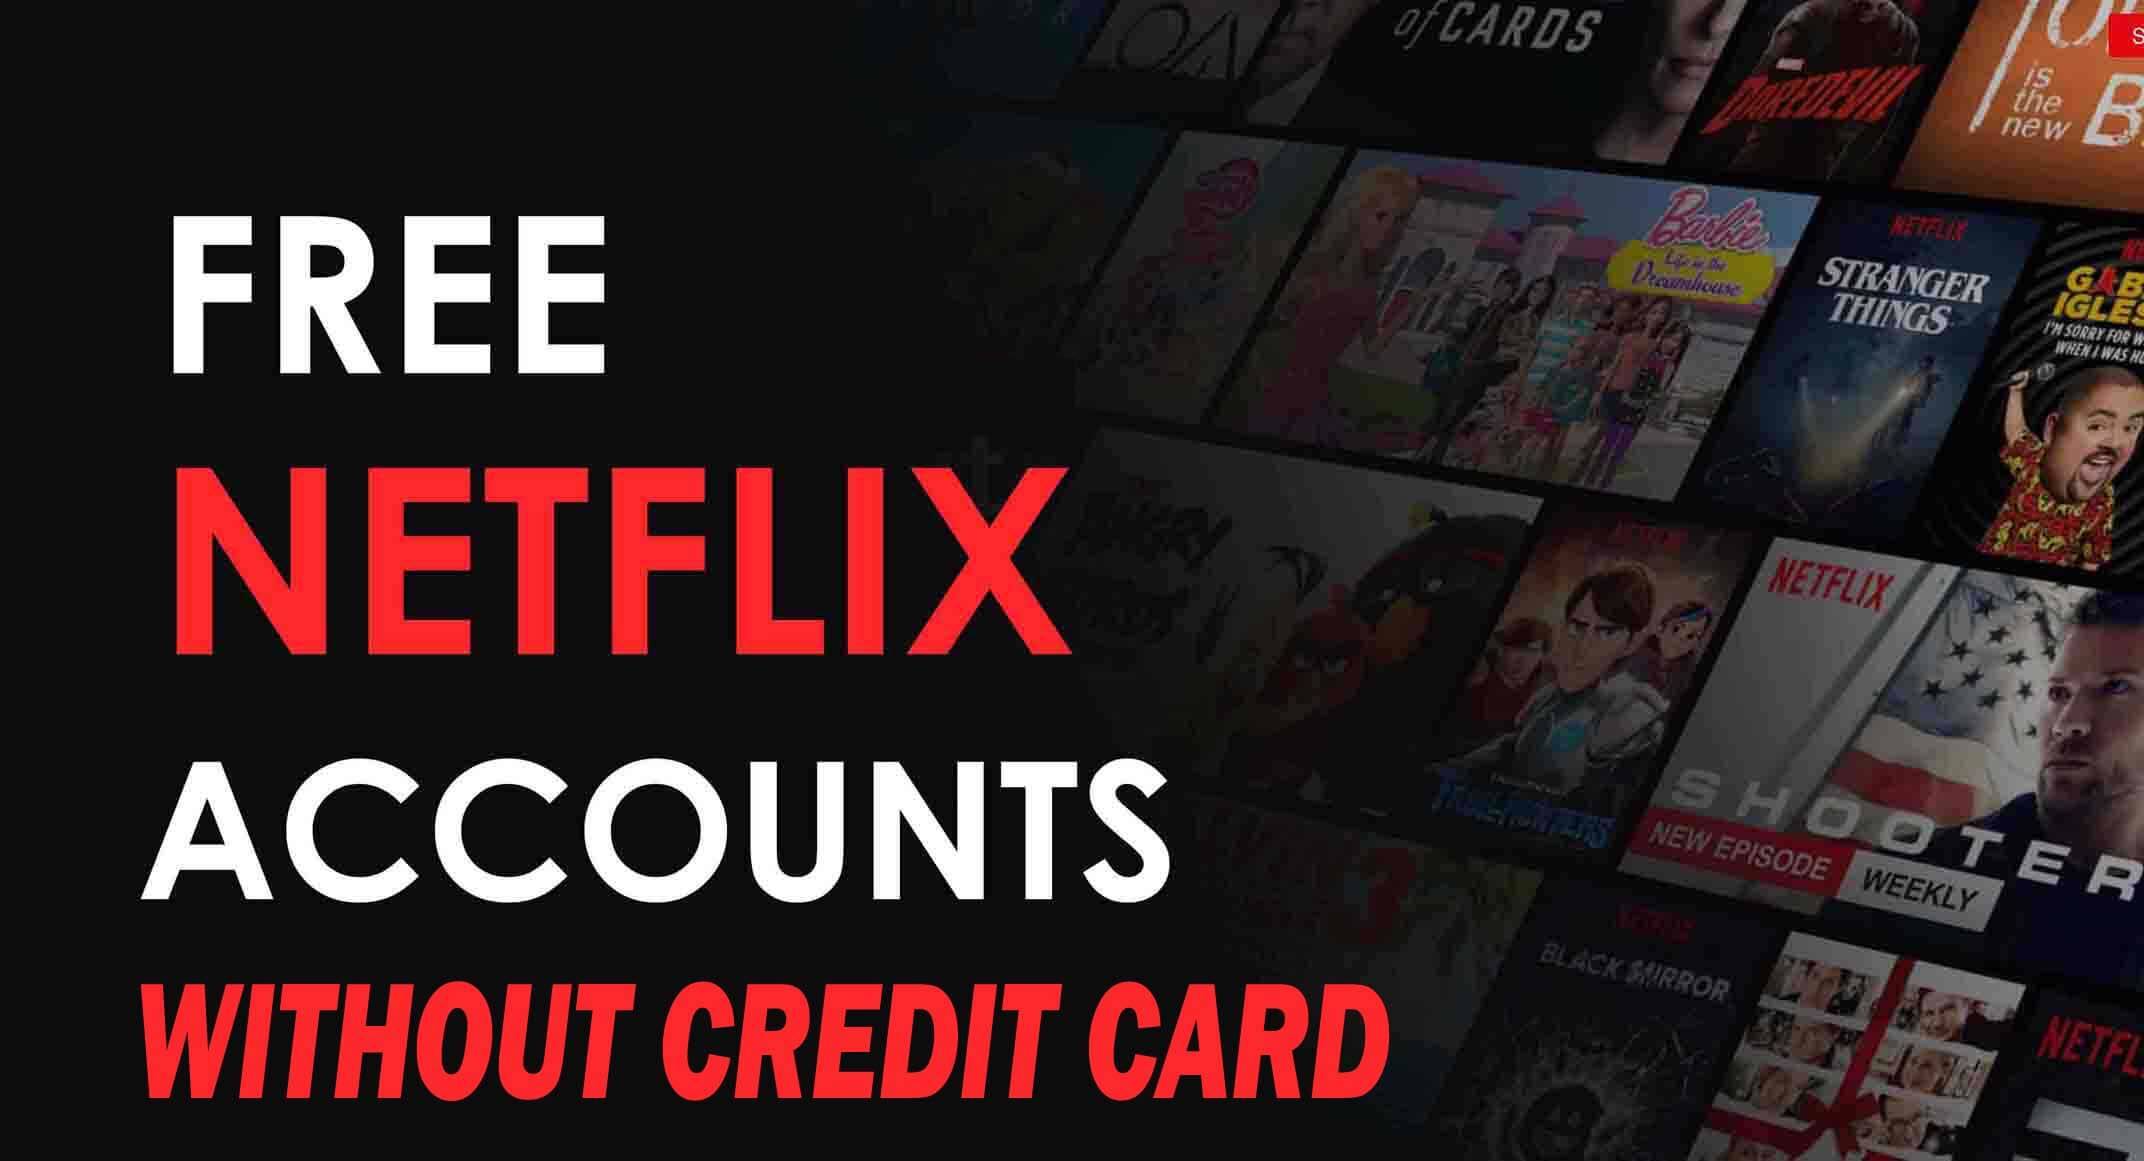 Free Netflix Accounts without Credit Card